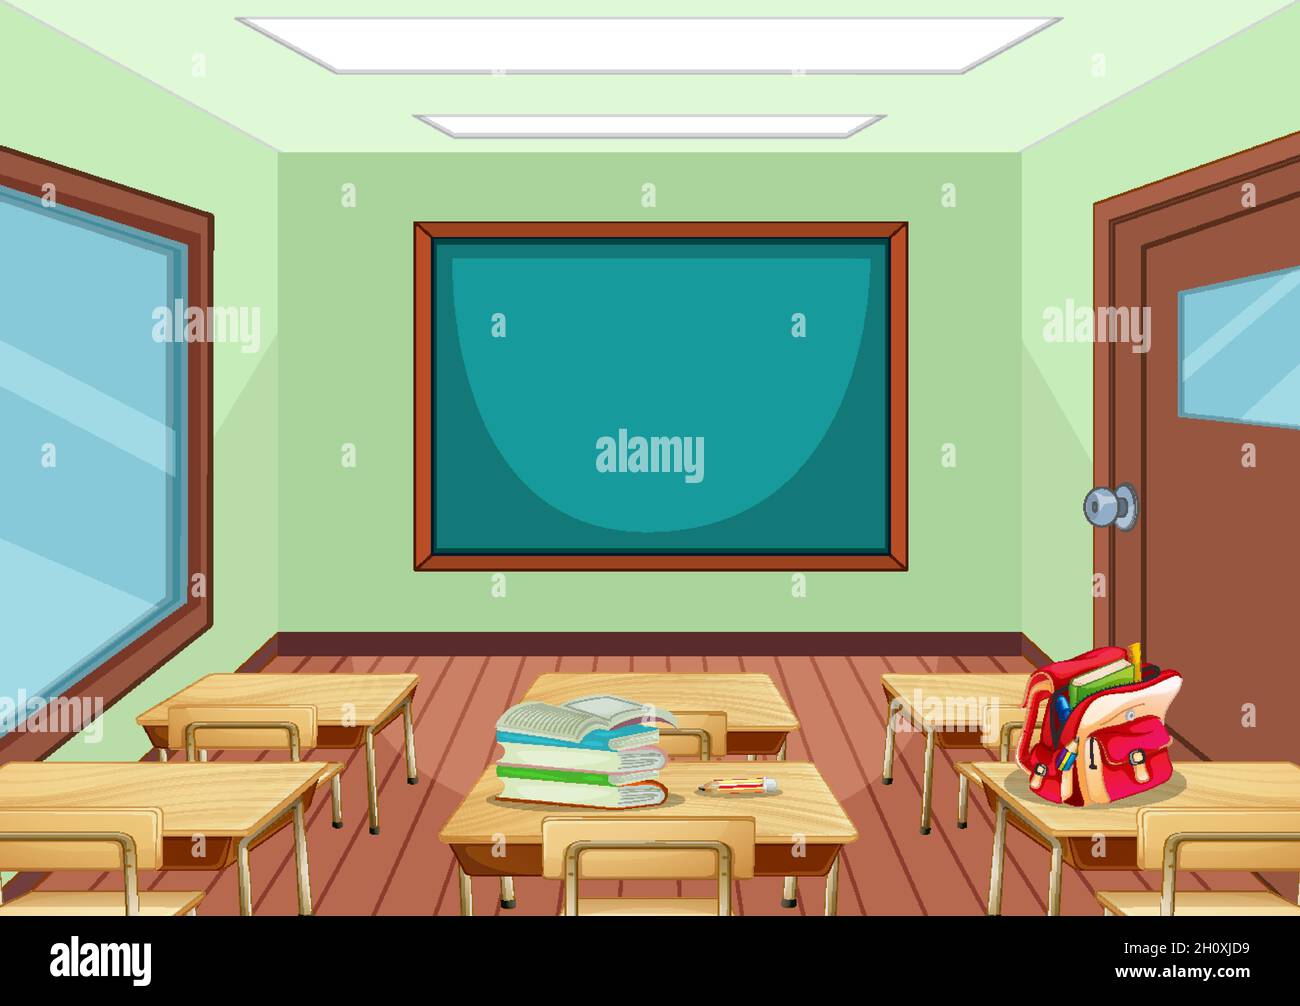 Empty Classroom Interior With Chalkboard Illustration Stock Vector Image And Art Alamy 